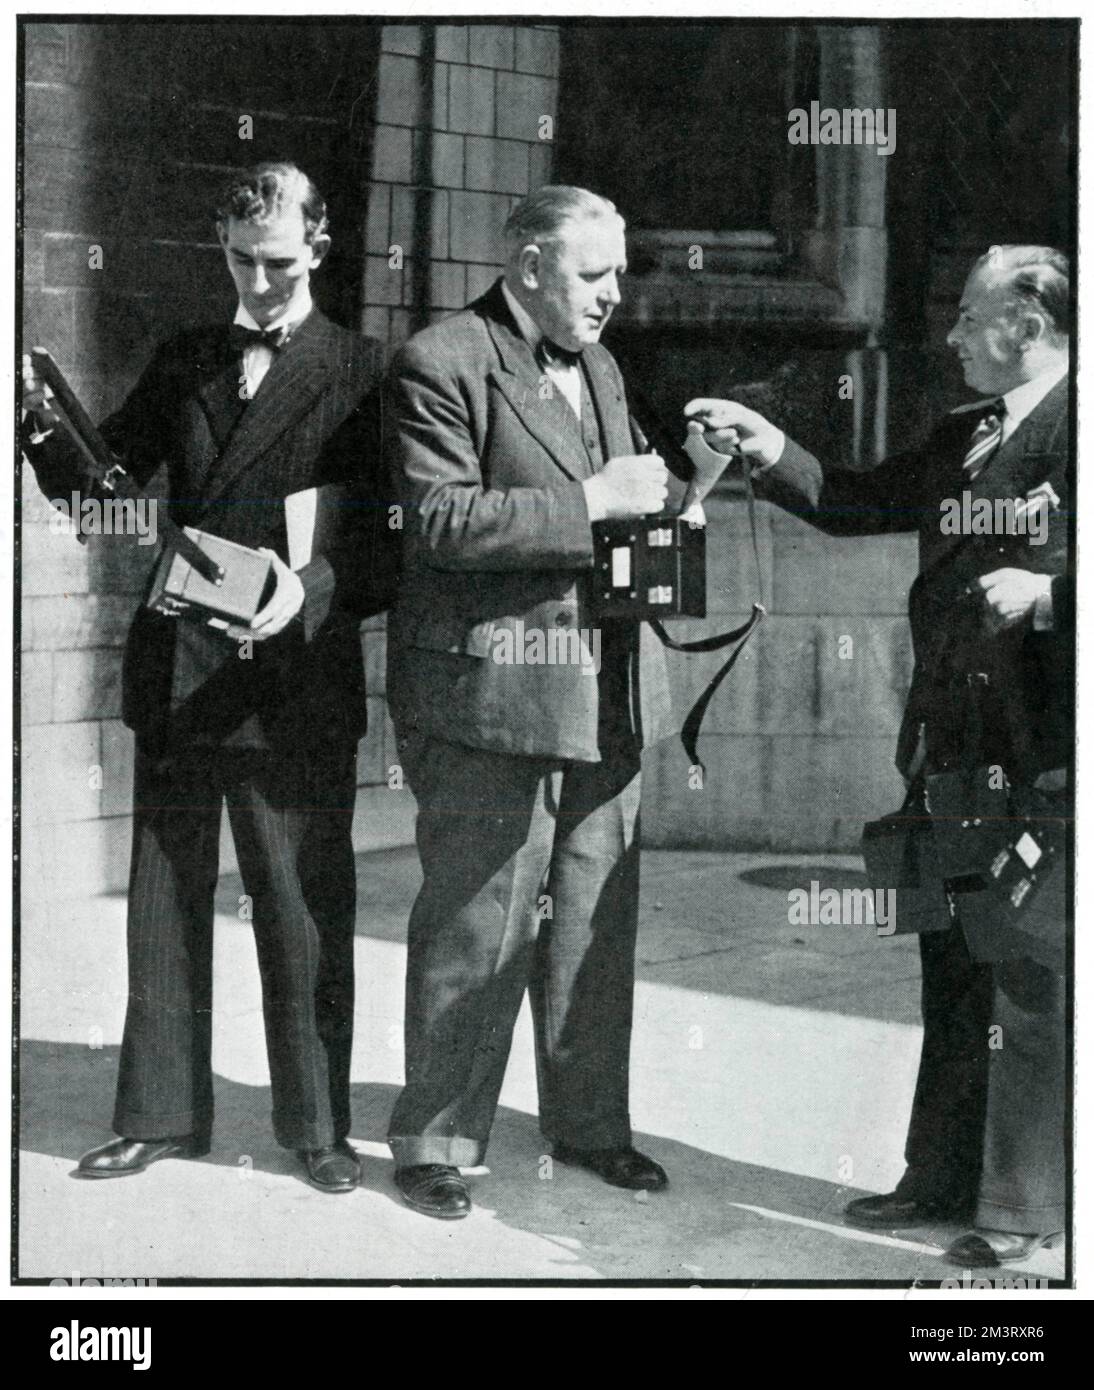 Mr Hutton, originally from Poland, photographed handing gas mask containers to Members of Parliament. The Sphere describes how Mr Hutton provided individually named gas mask containers for each representative as a gesture of thanks for British support in Poland against the German invasion, September 1939.  September 1939 Stock Photo